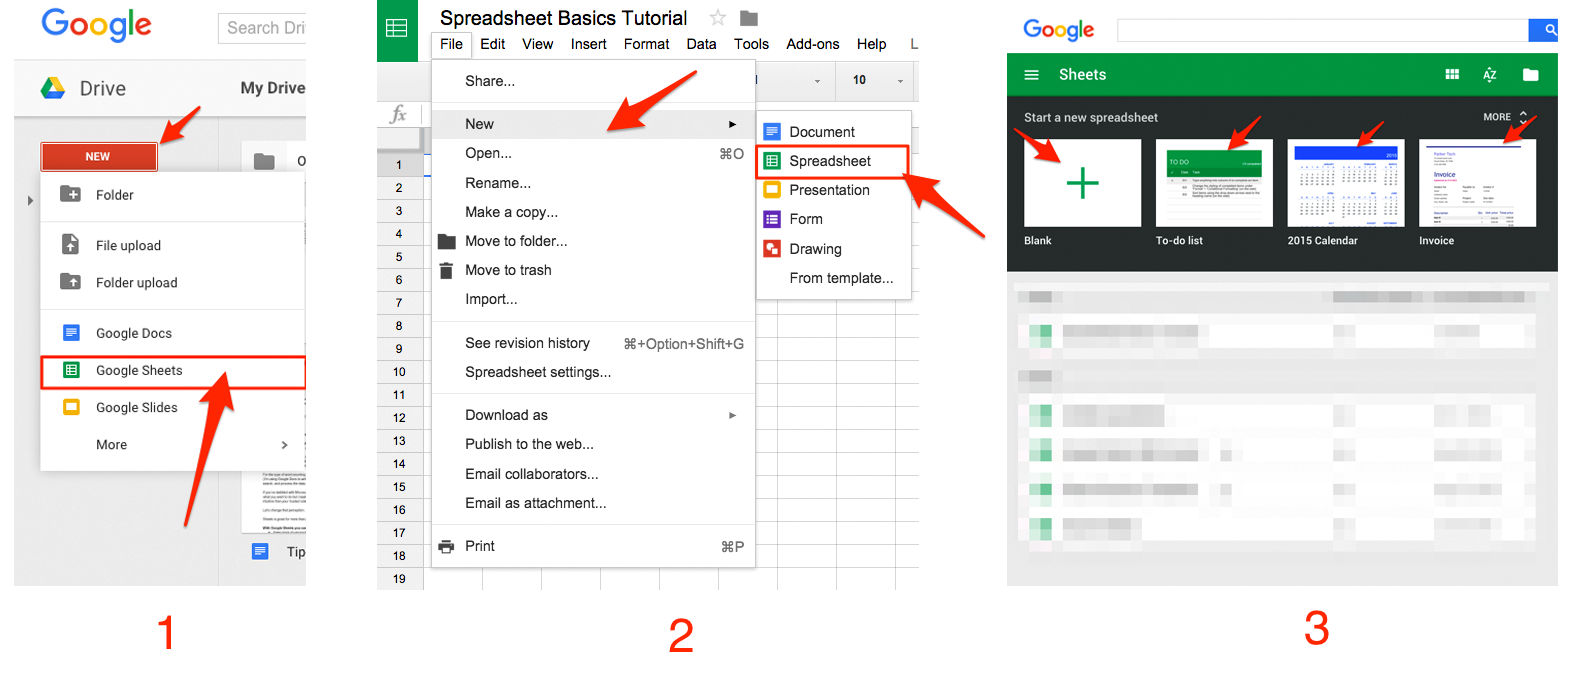 Excel Spreadsheet Basics In Google Sheets 101: The Beginner's Guide To Online Spreadsheets  The